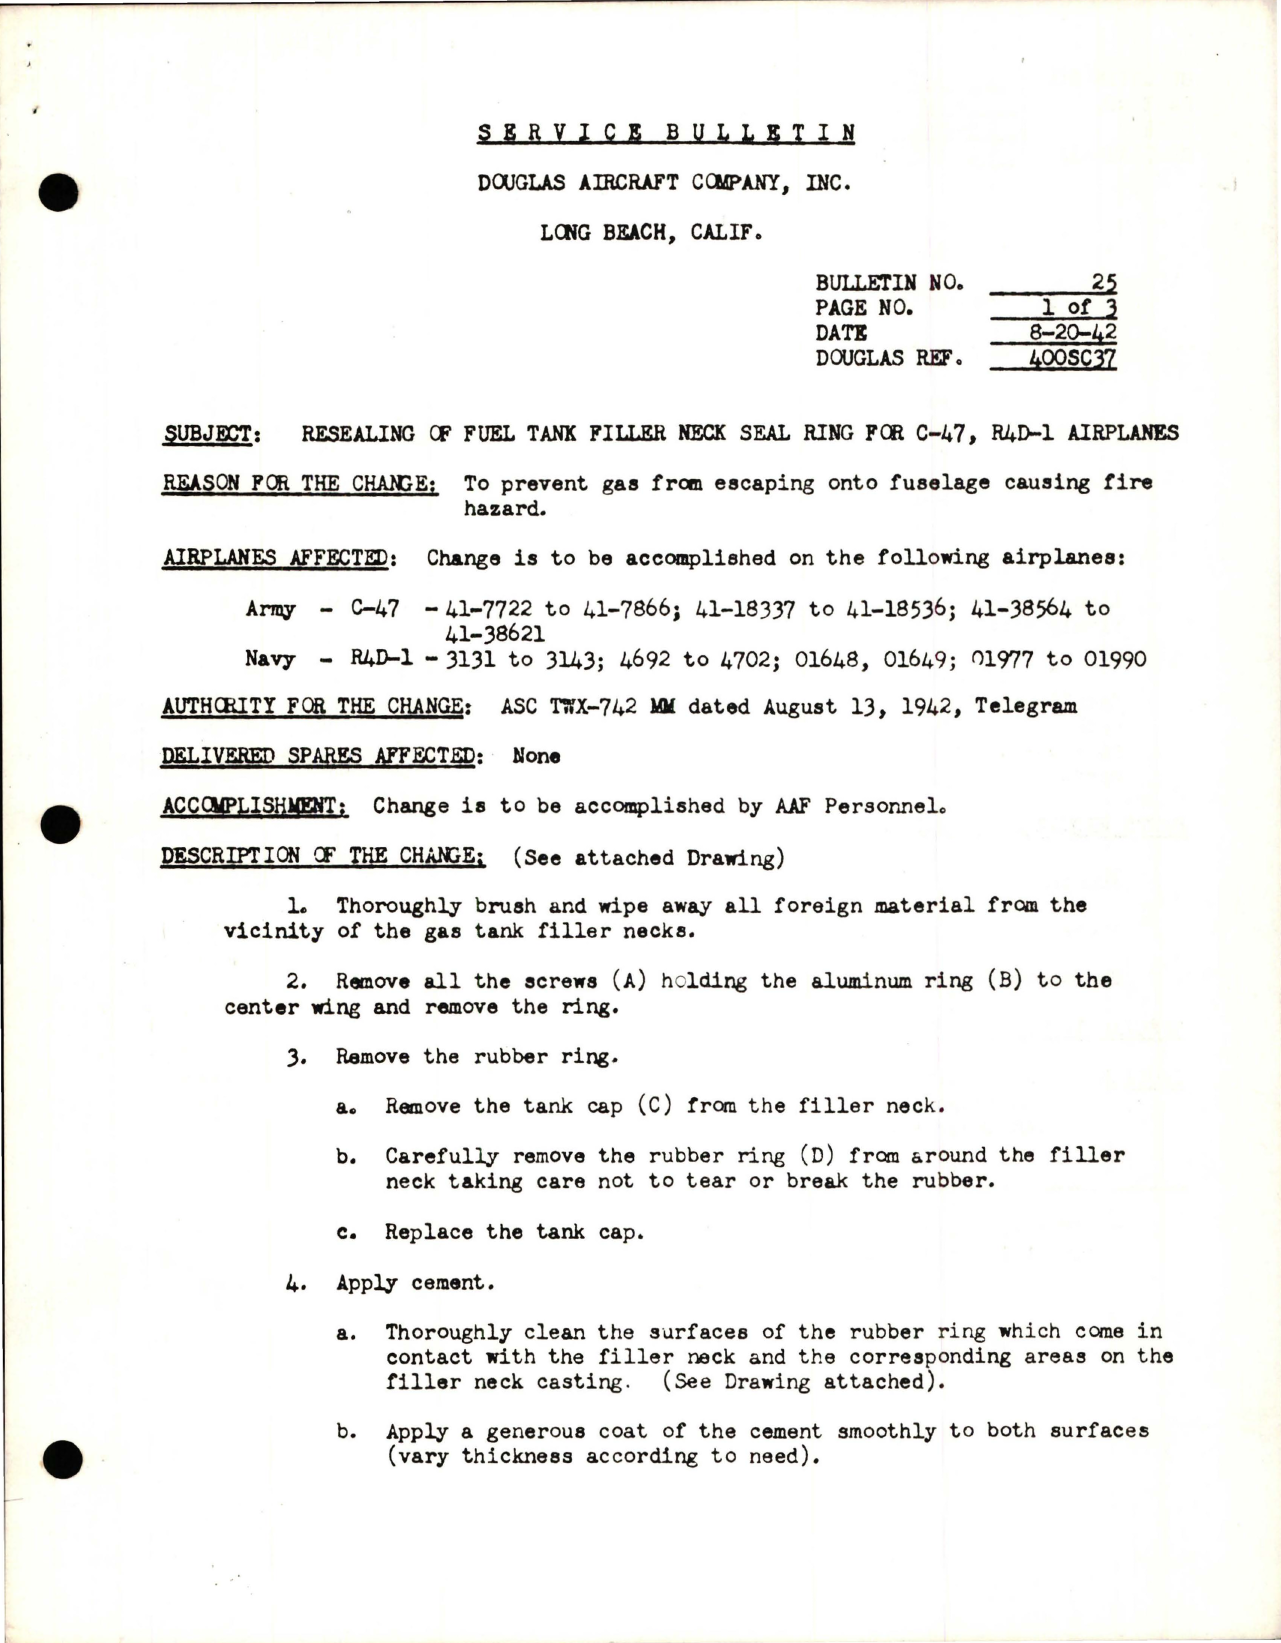 Sample page 1 from AirCorps Library document: Resealing of Fuel Tank Filler Neck Seal Ring for C-47 and R4D-1